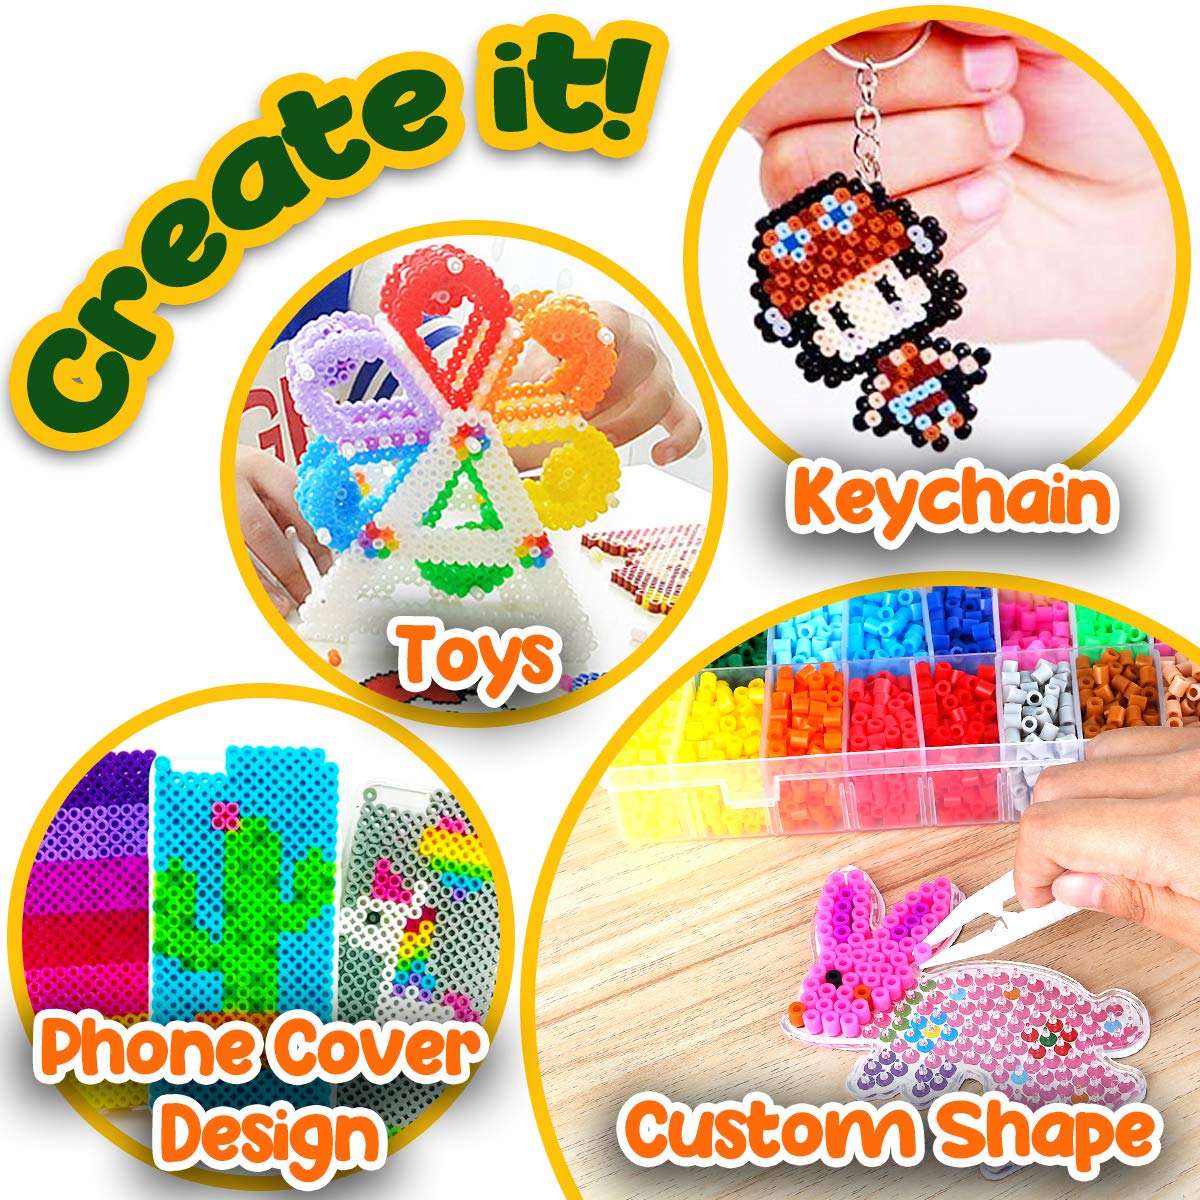  Goodyking Arts and Crafts Supplies for Kids - All in